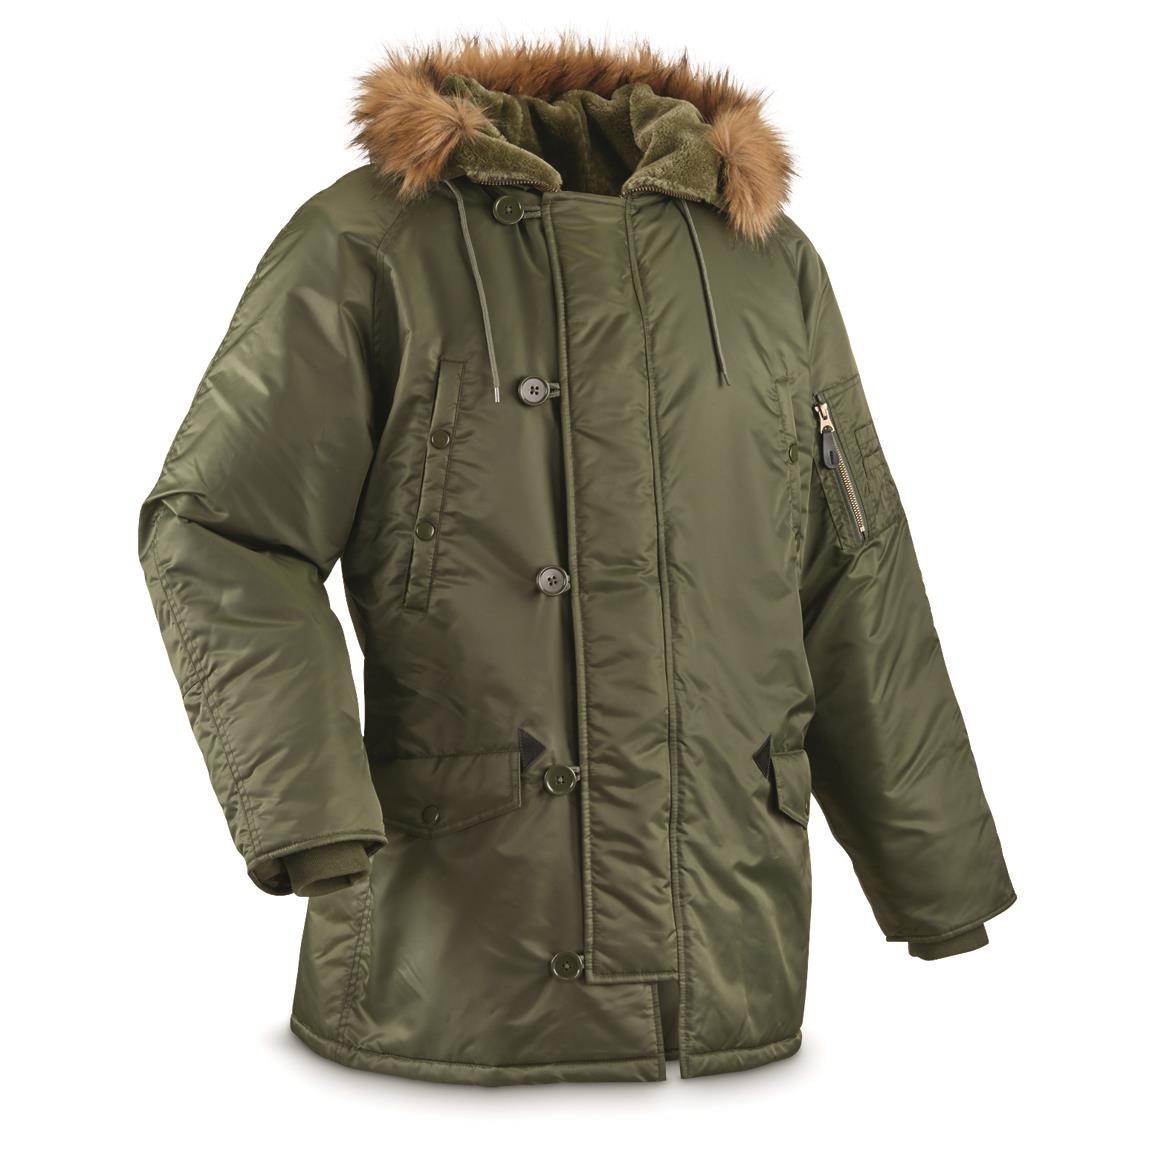 HQ ISSUE Men's Military Style N-3B Parka, Sage Green